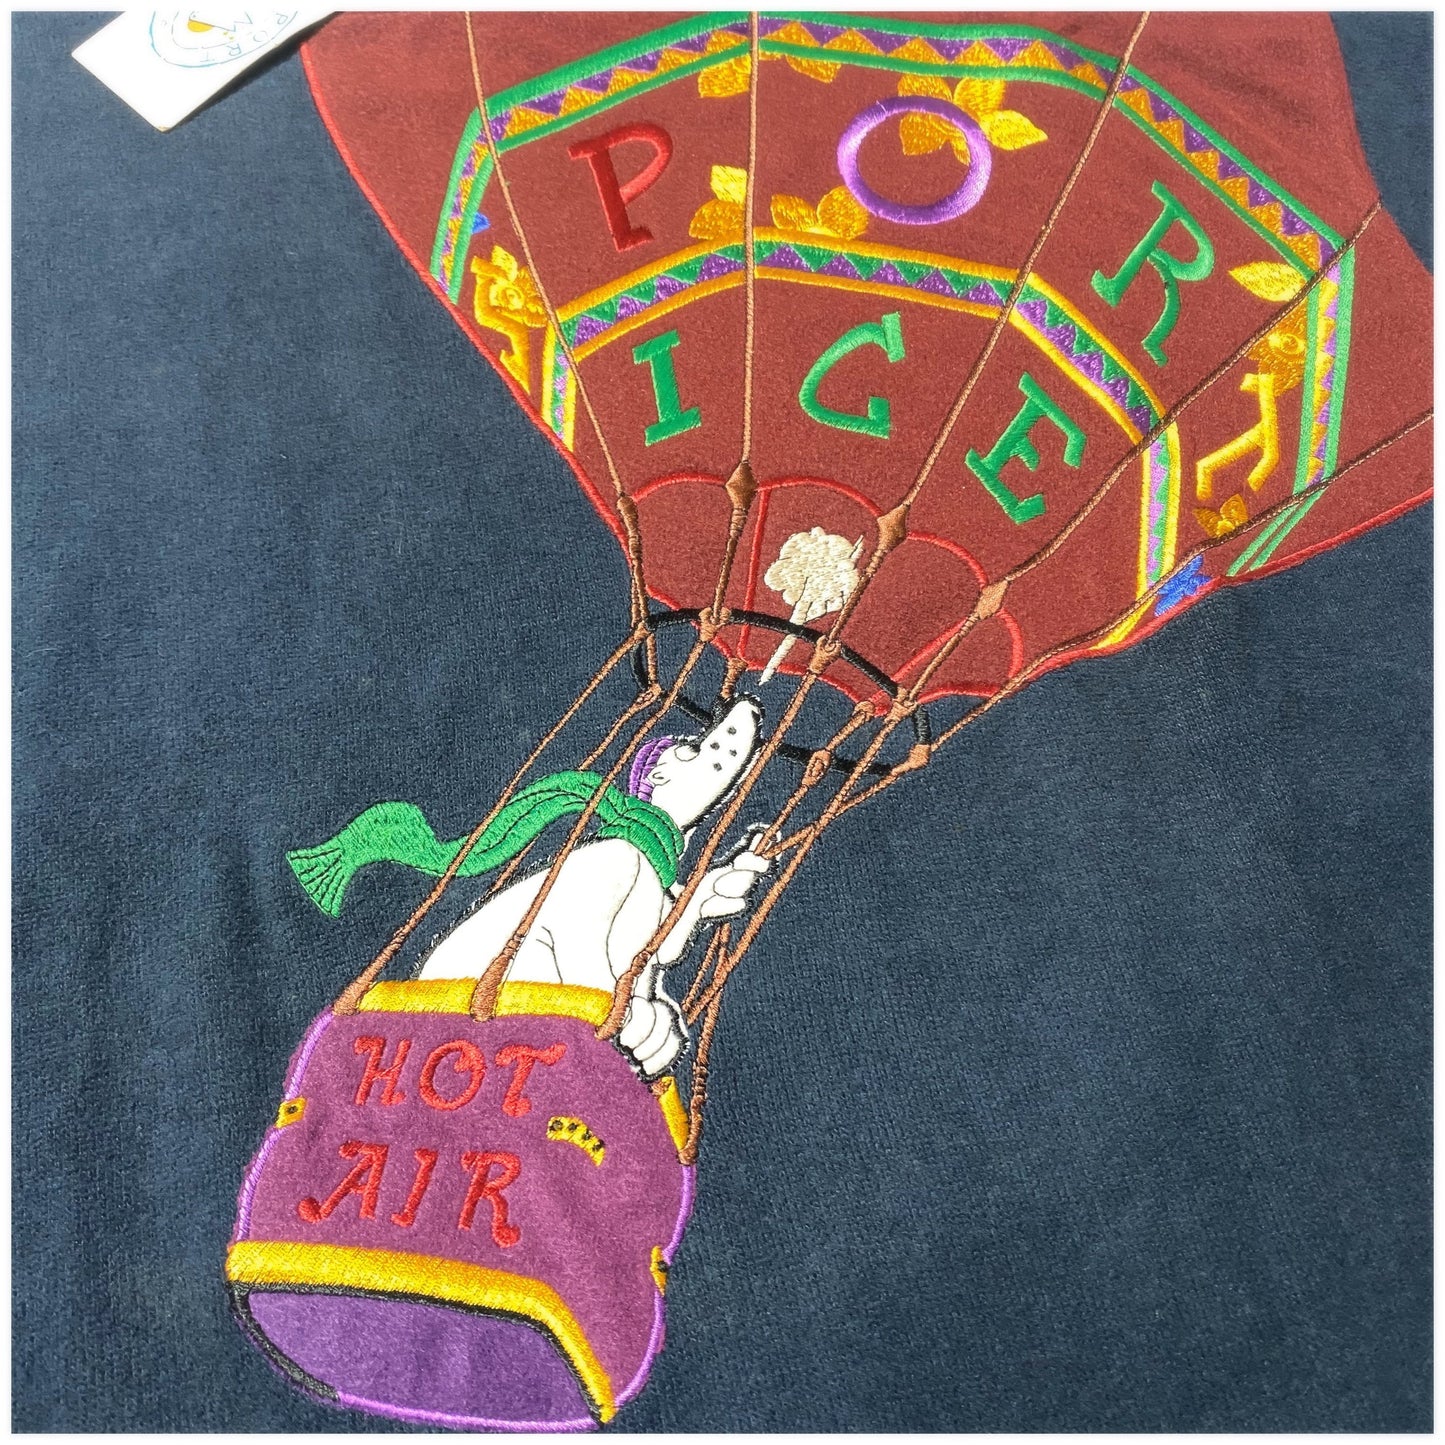 Iceberg sport NWT 90s warm sweatshirt with bear on a hot air balloon embroidered and silk patches, new old stock